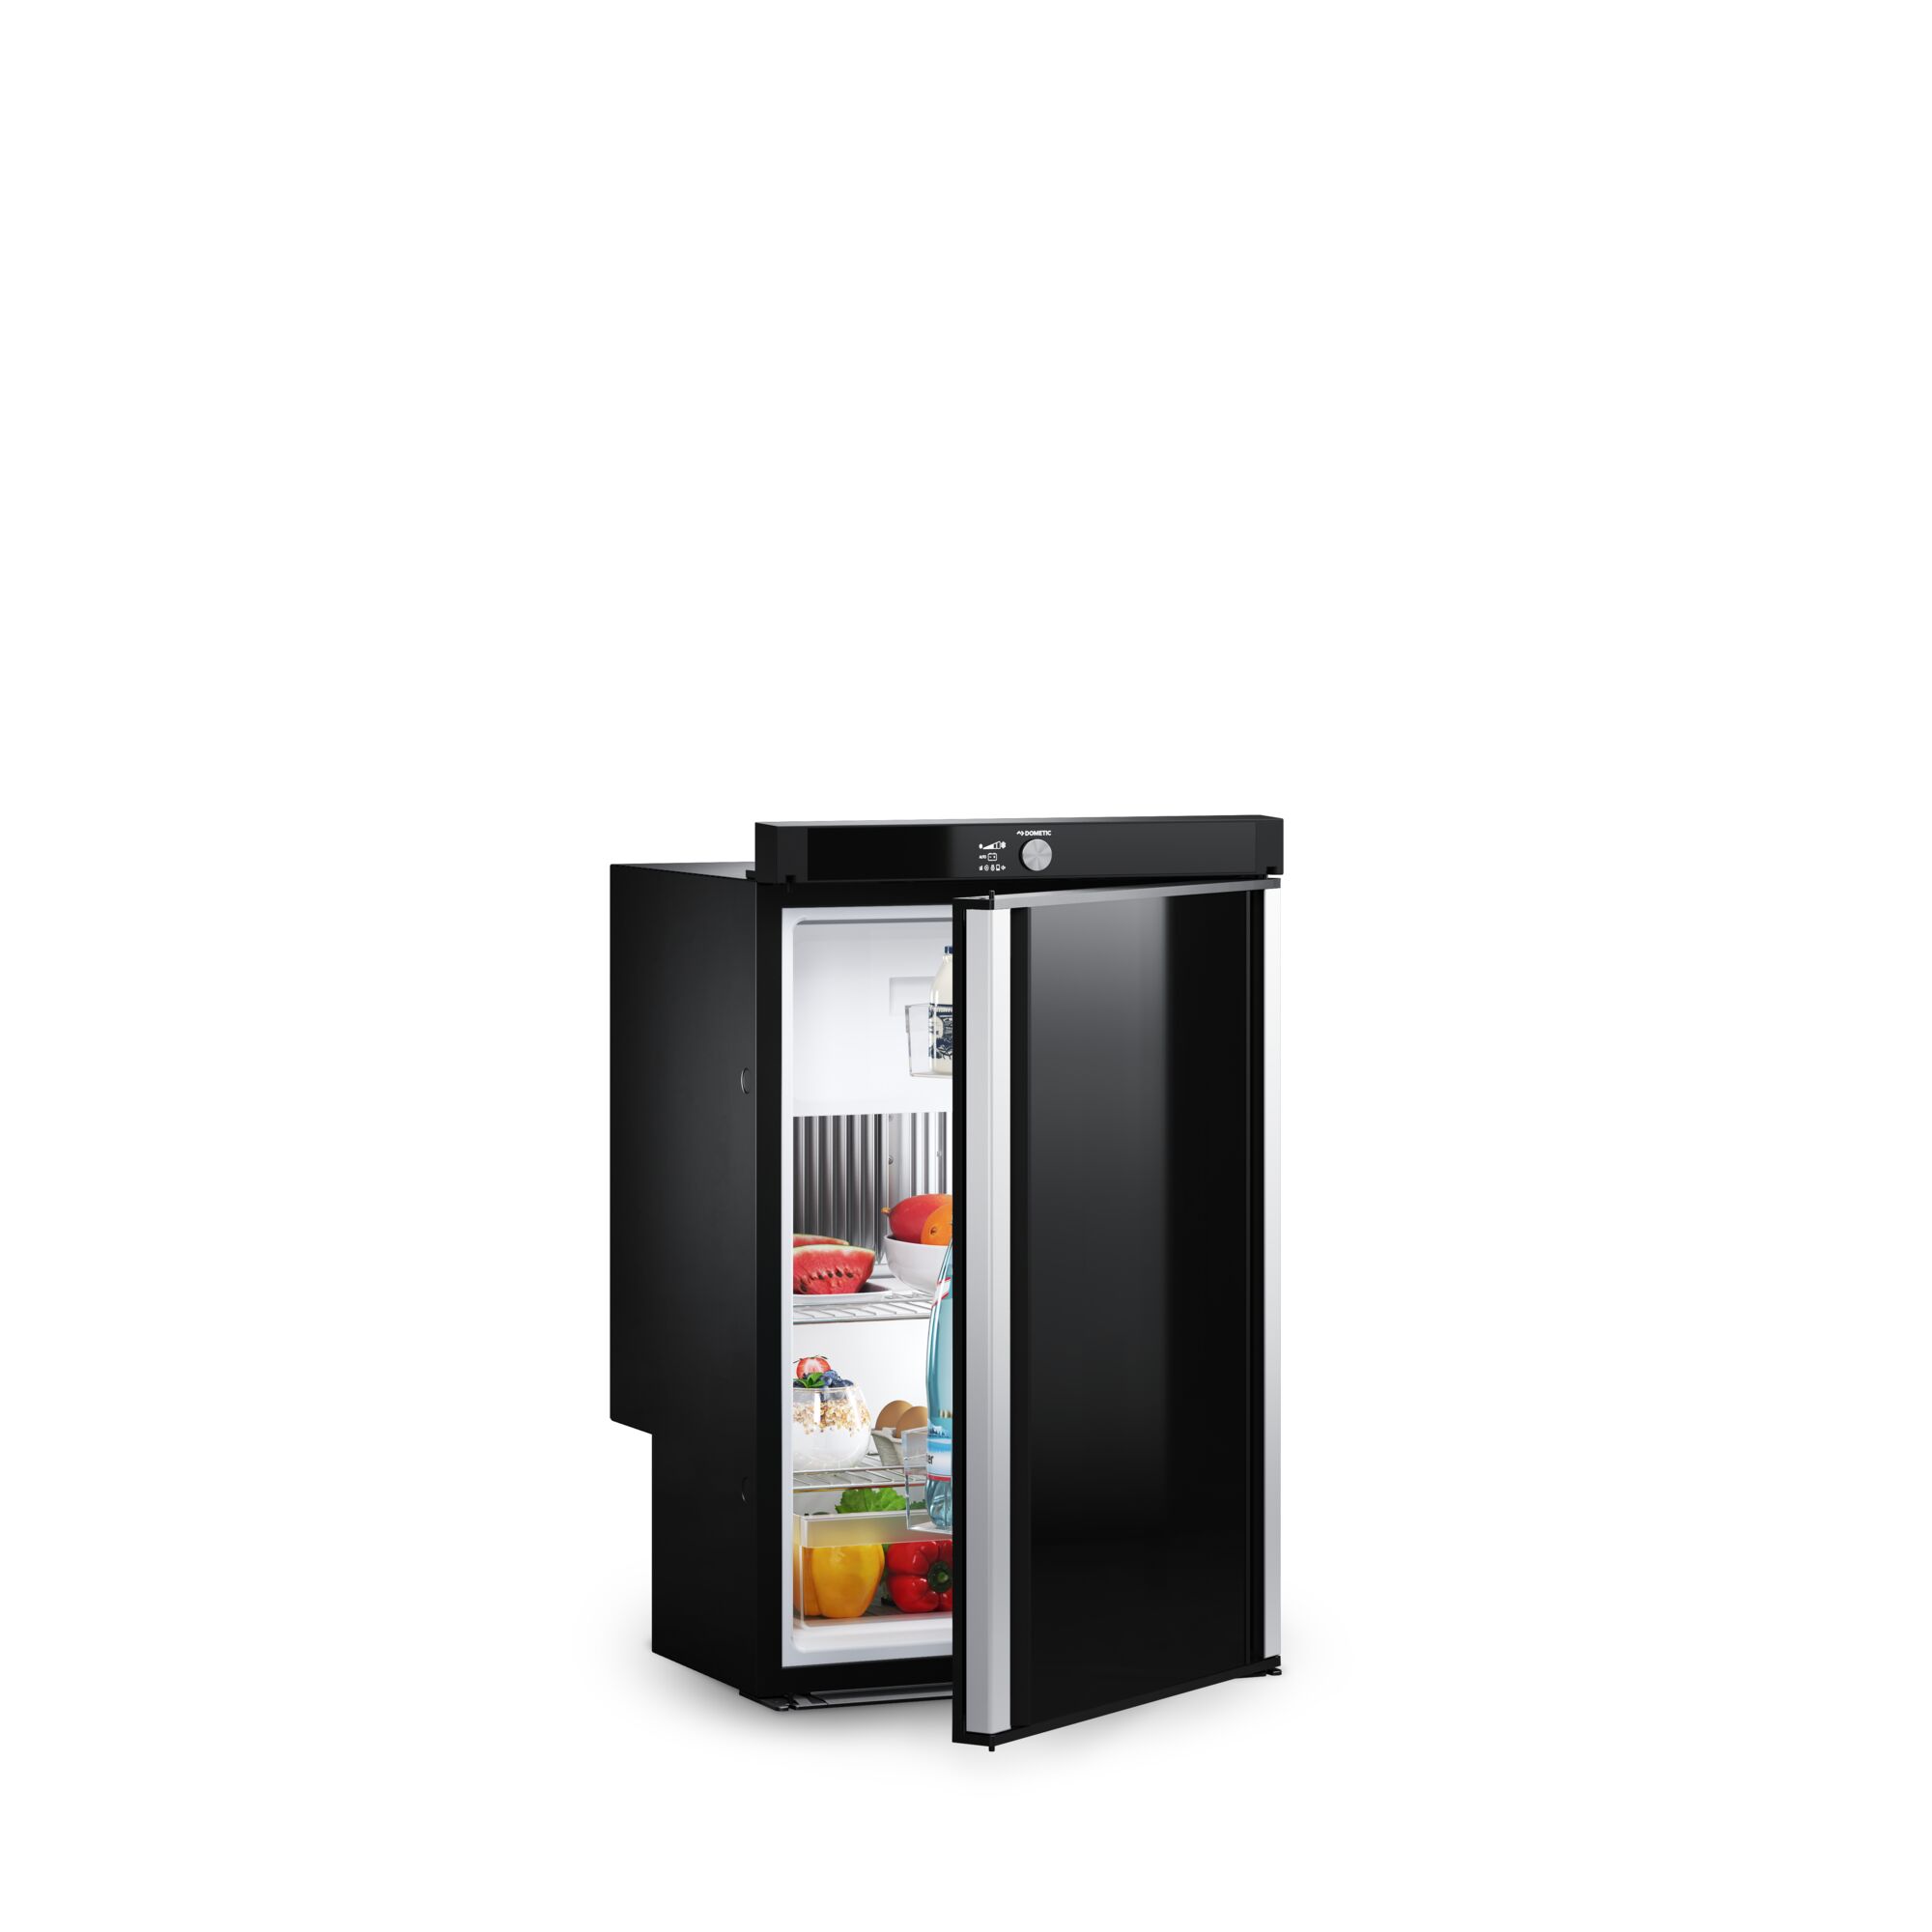 Dometic RMS 10.5T - Absorption fridge, 83 l, TFT display, double-hinged door